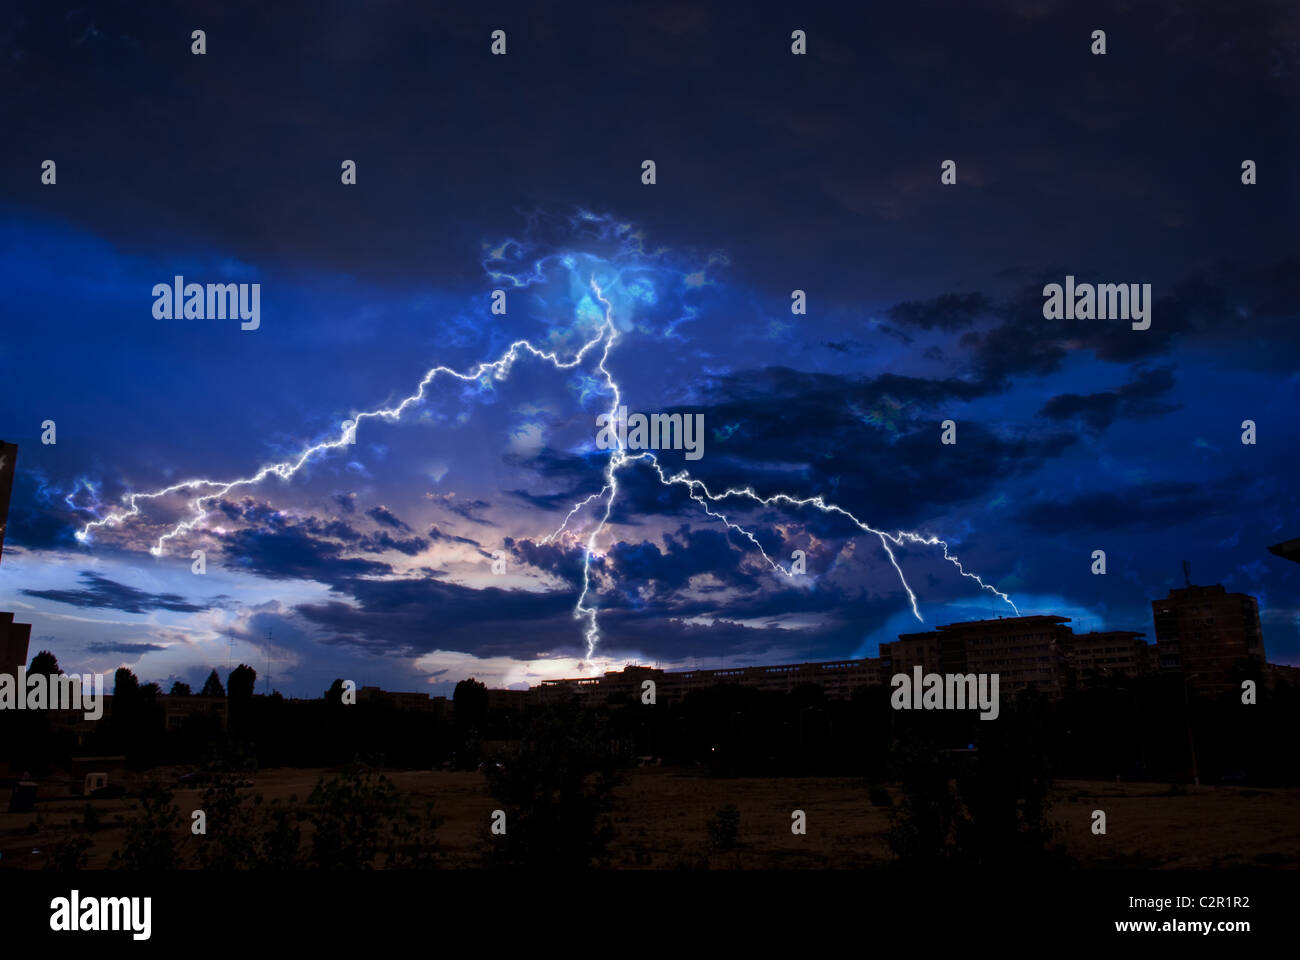 Lightning and storm clouds over the city evening Stock Photo